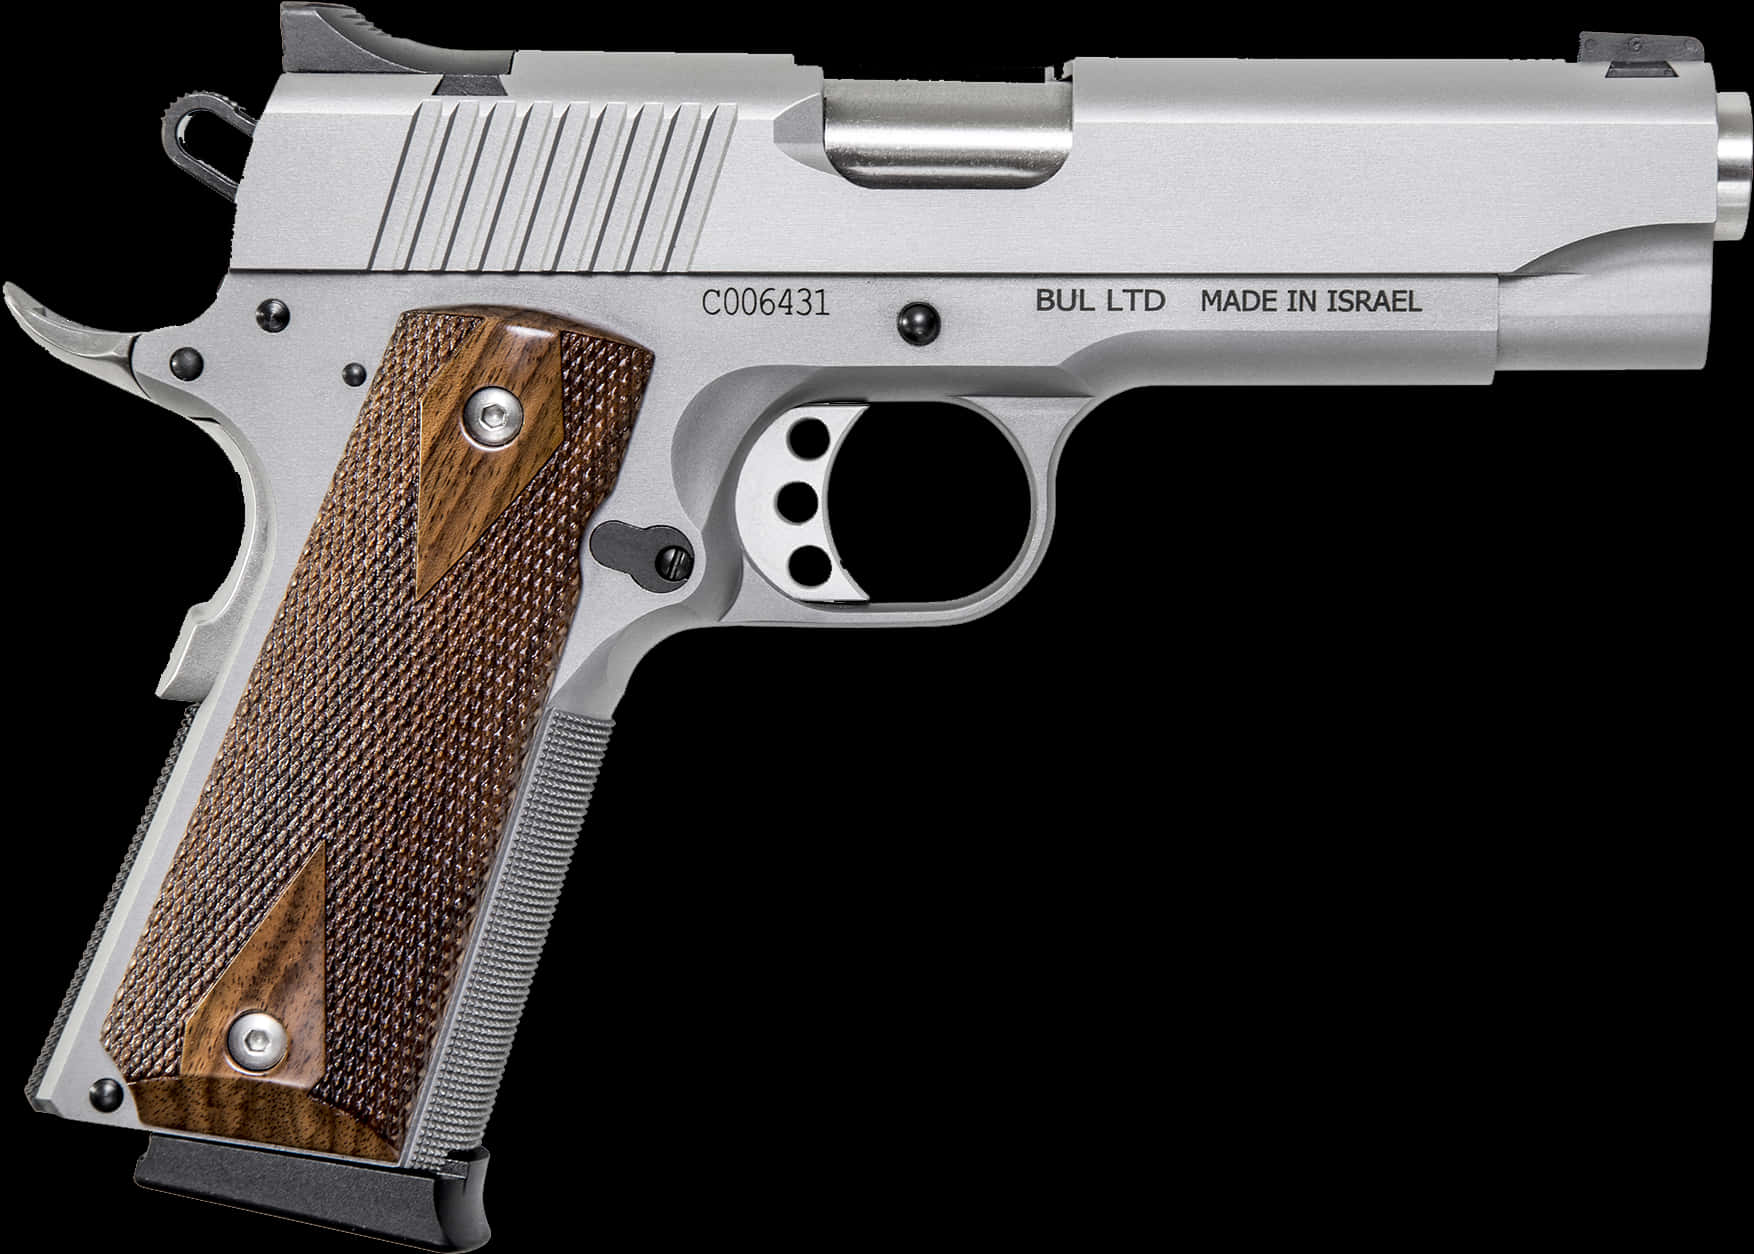 A Silver And Brown Handgun With Springfield Armory In The Background